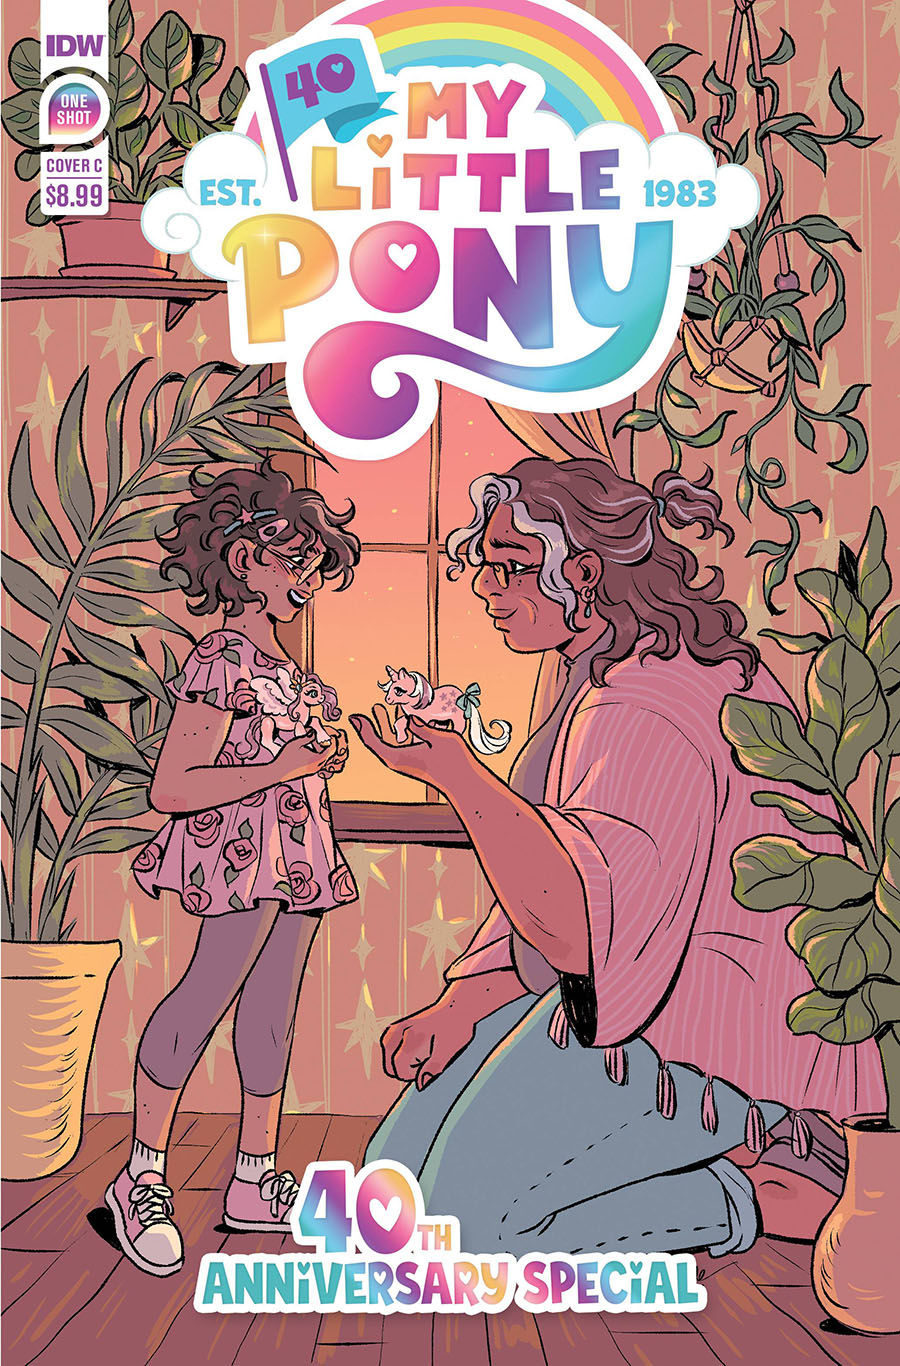 My Little Pony 40th Anniversary Special #1 (One Shot) Cover C Variant Rose Bousamra Cover